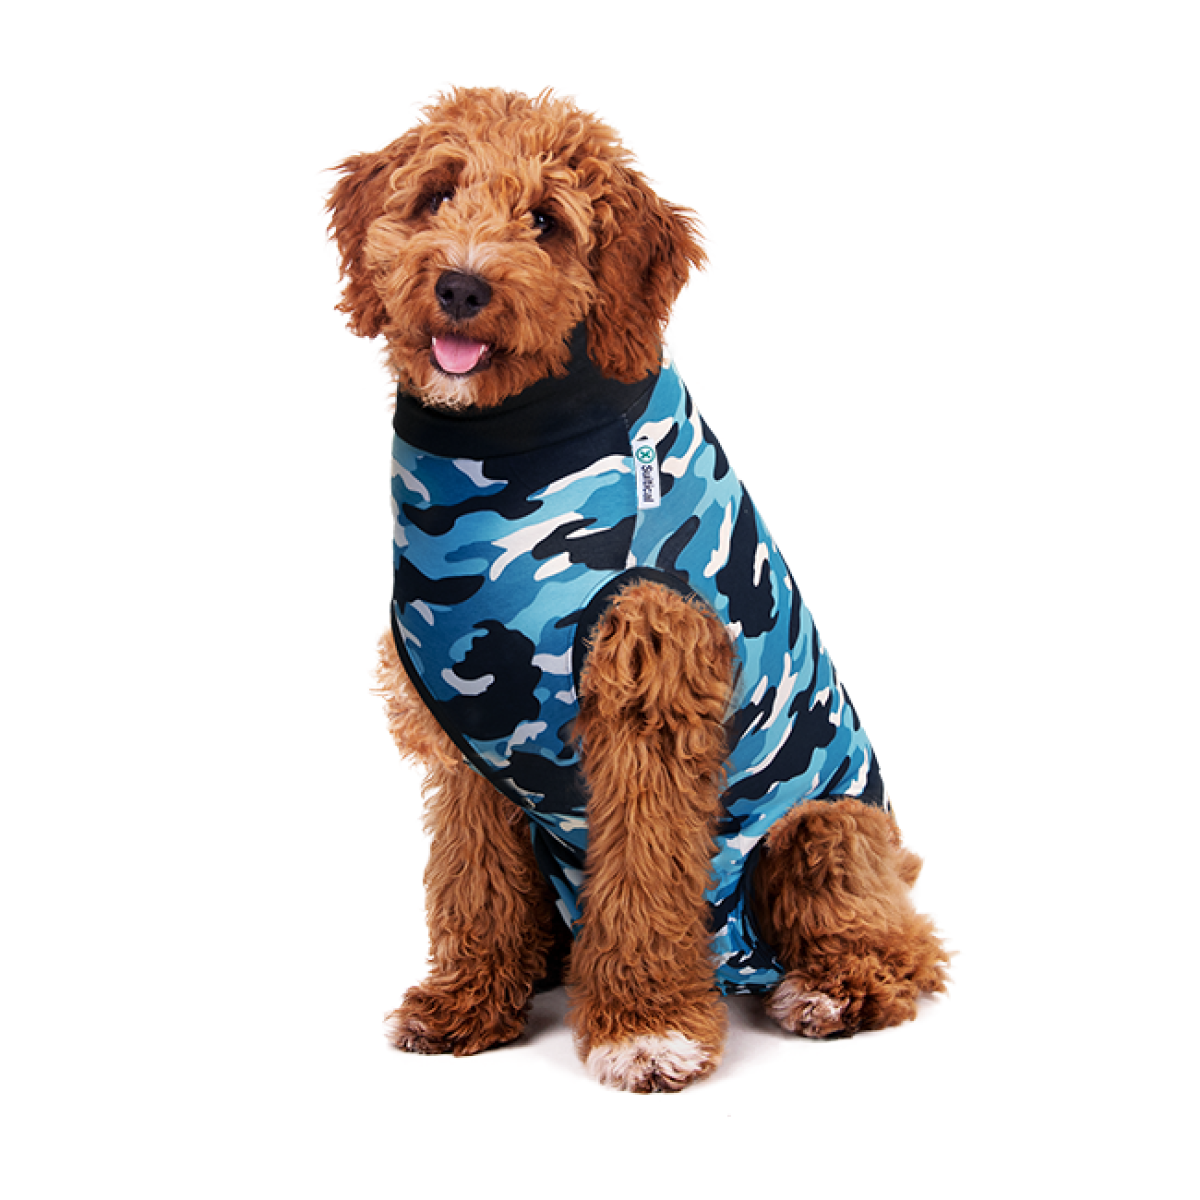 Suitical Recovery Suit for Dogs Black Large 